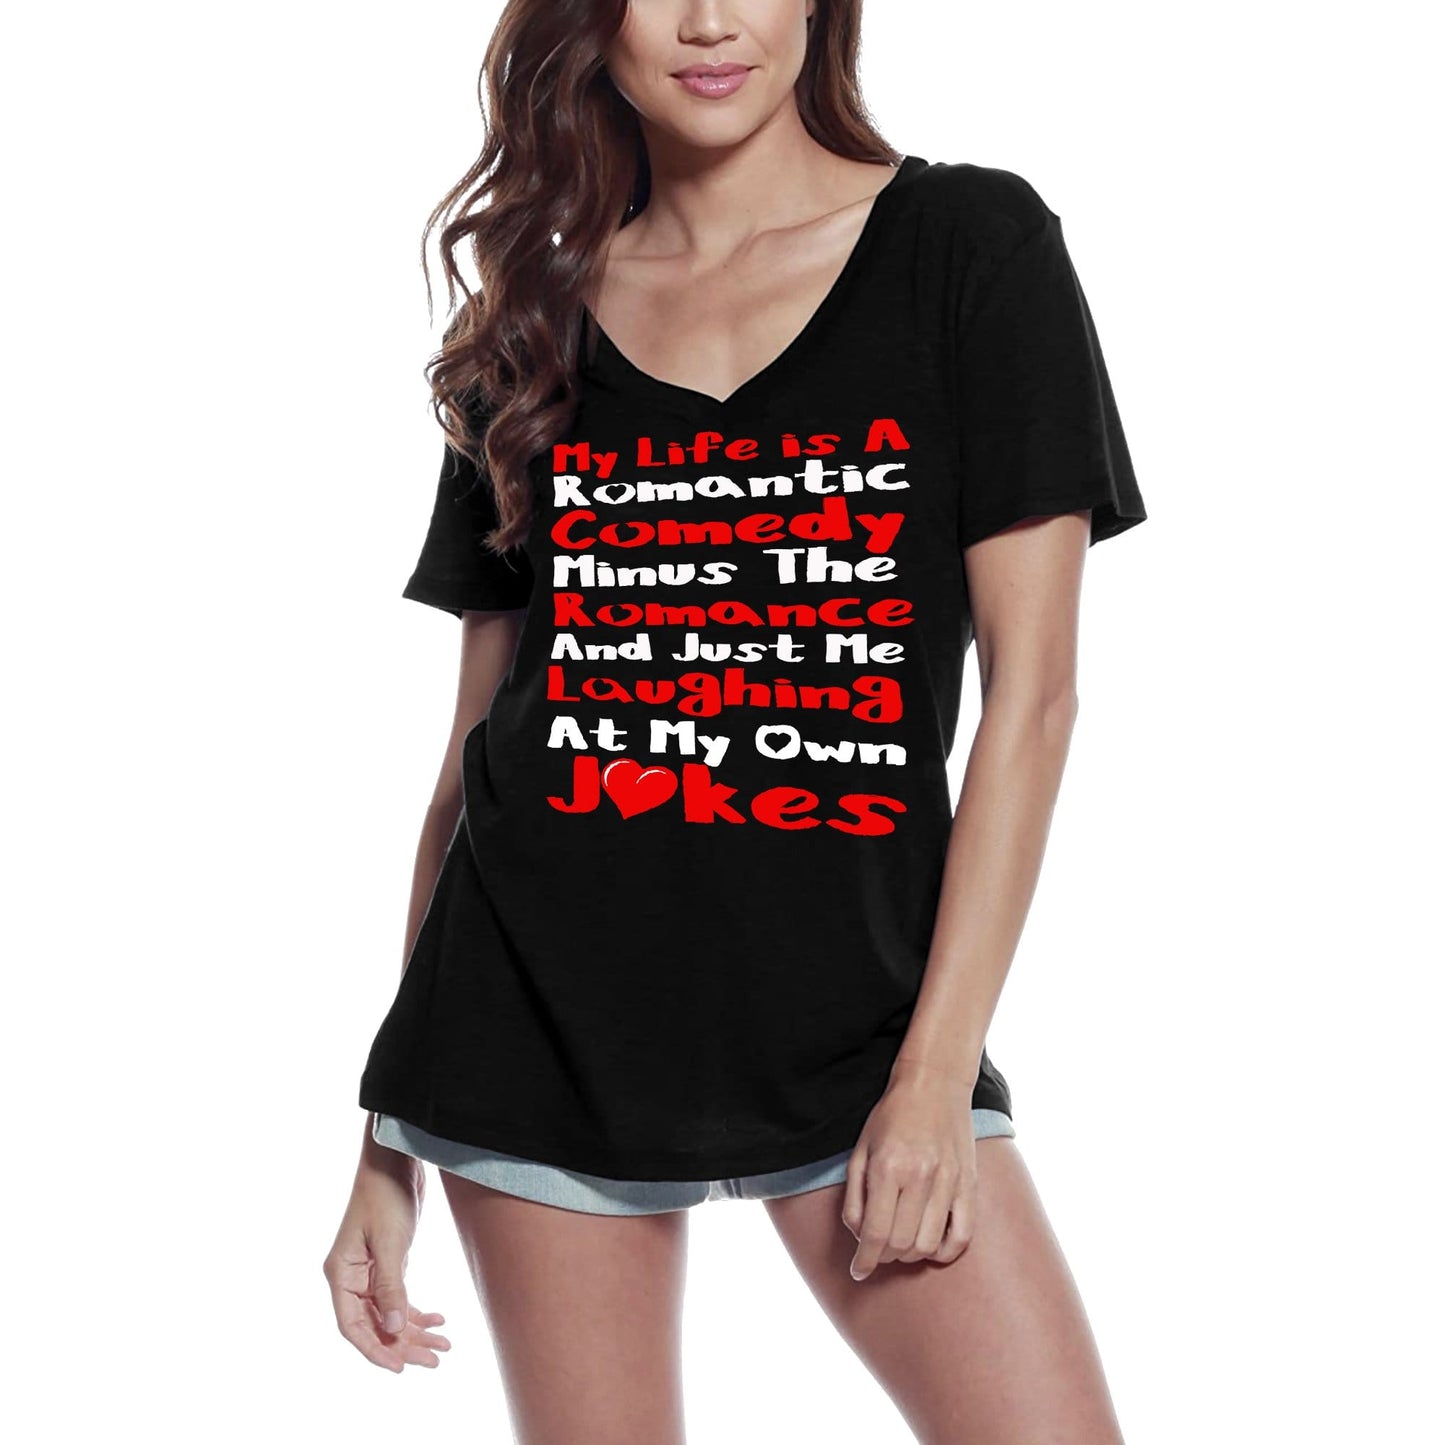 ULTRABASIC Damen-T-Shirt „My Life is a Romantic Comedy Minus the Romance and Just Me Laughing at My Own Jokes“ – lustiges T-Shirt